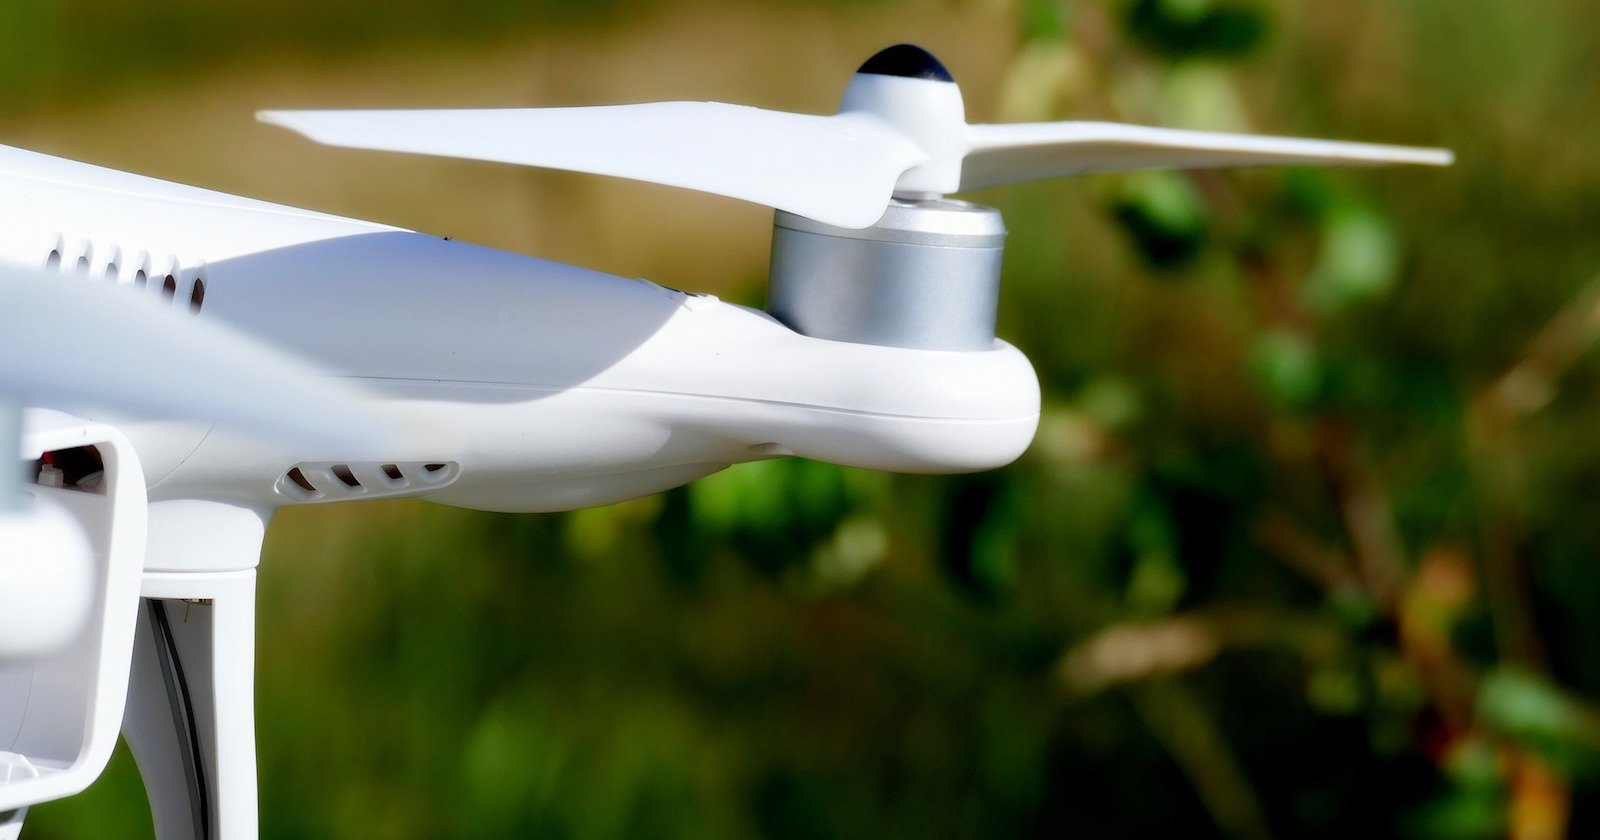 Friends Sue Groom After His Drone Hit Them in the Face During Reception